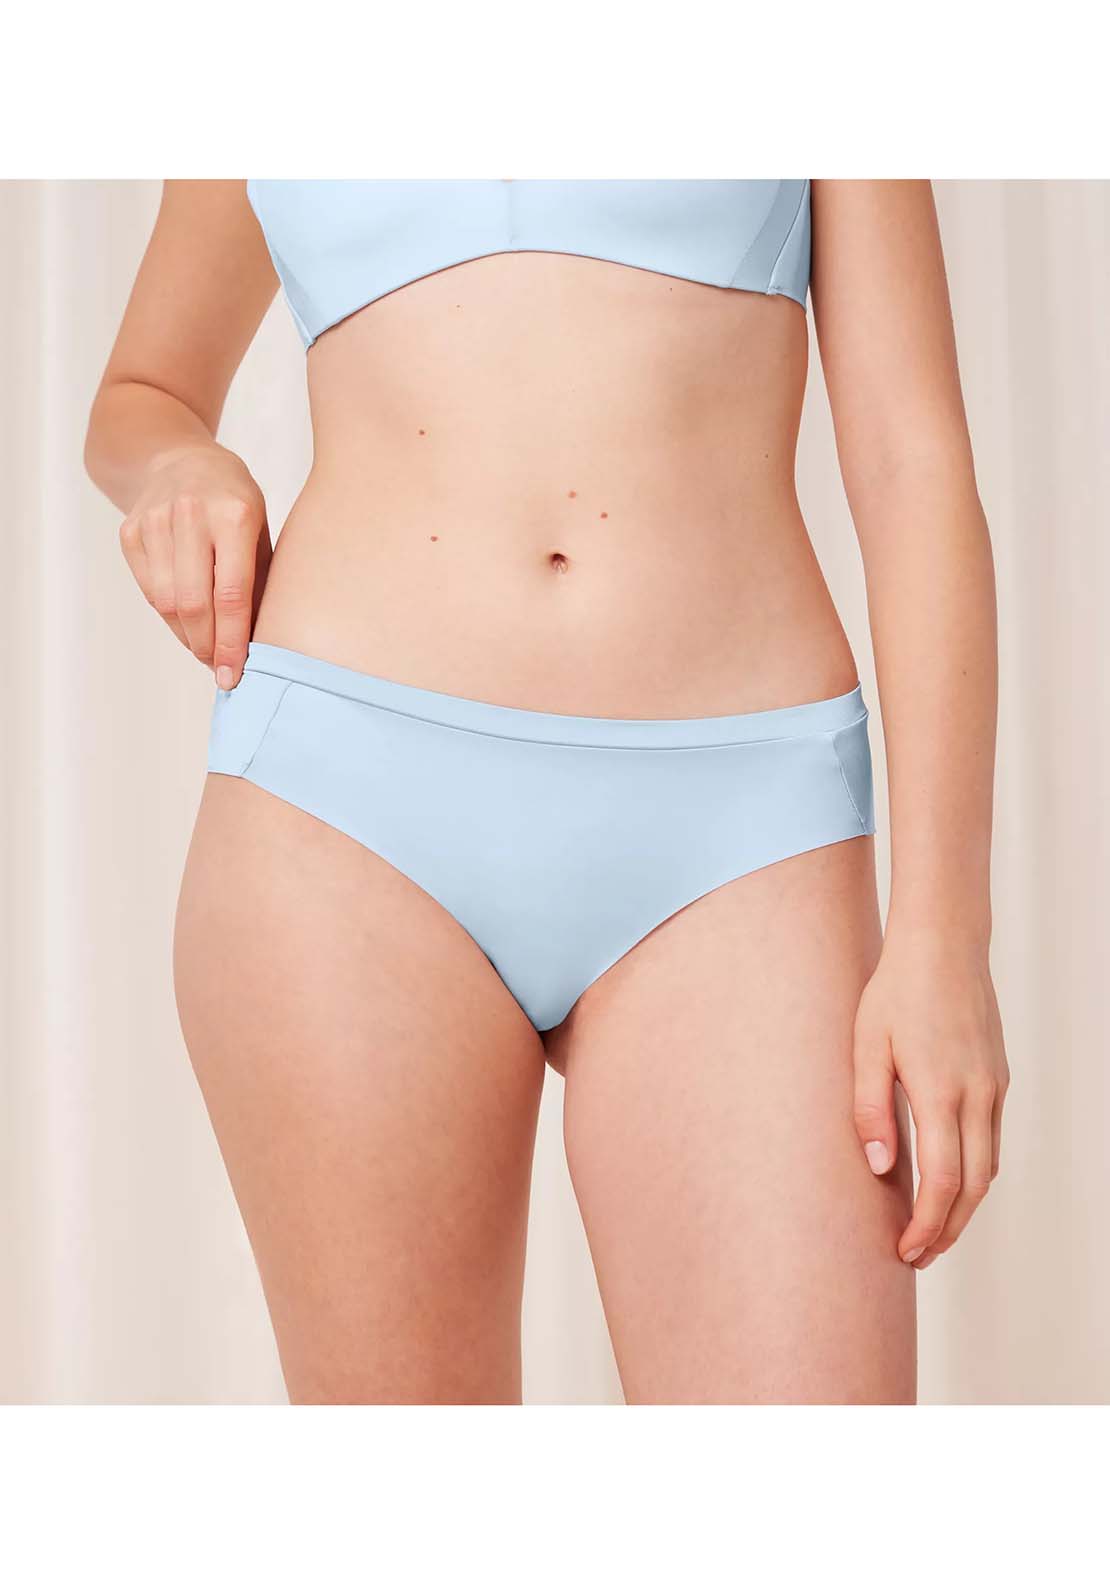 Triumph Body Make-up Soft Touch Hipster brief 2 Shaws Department Stores